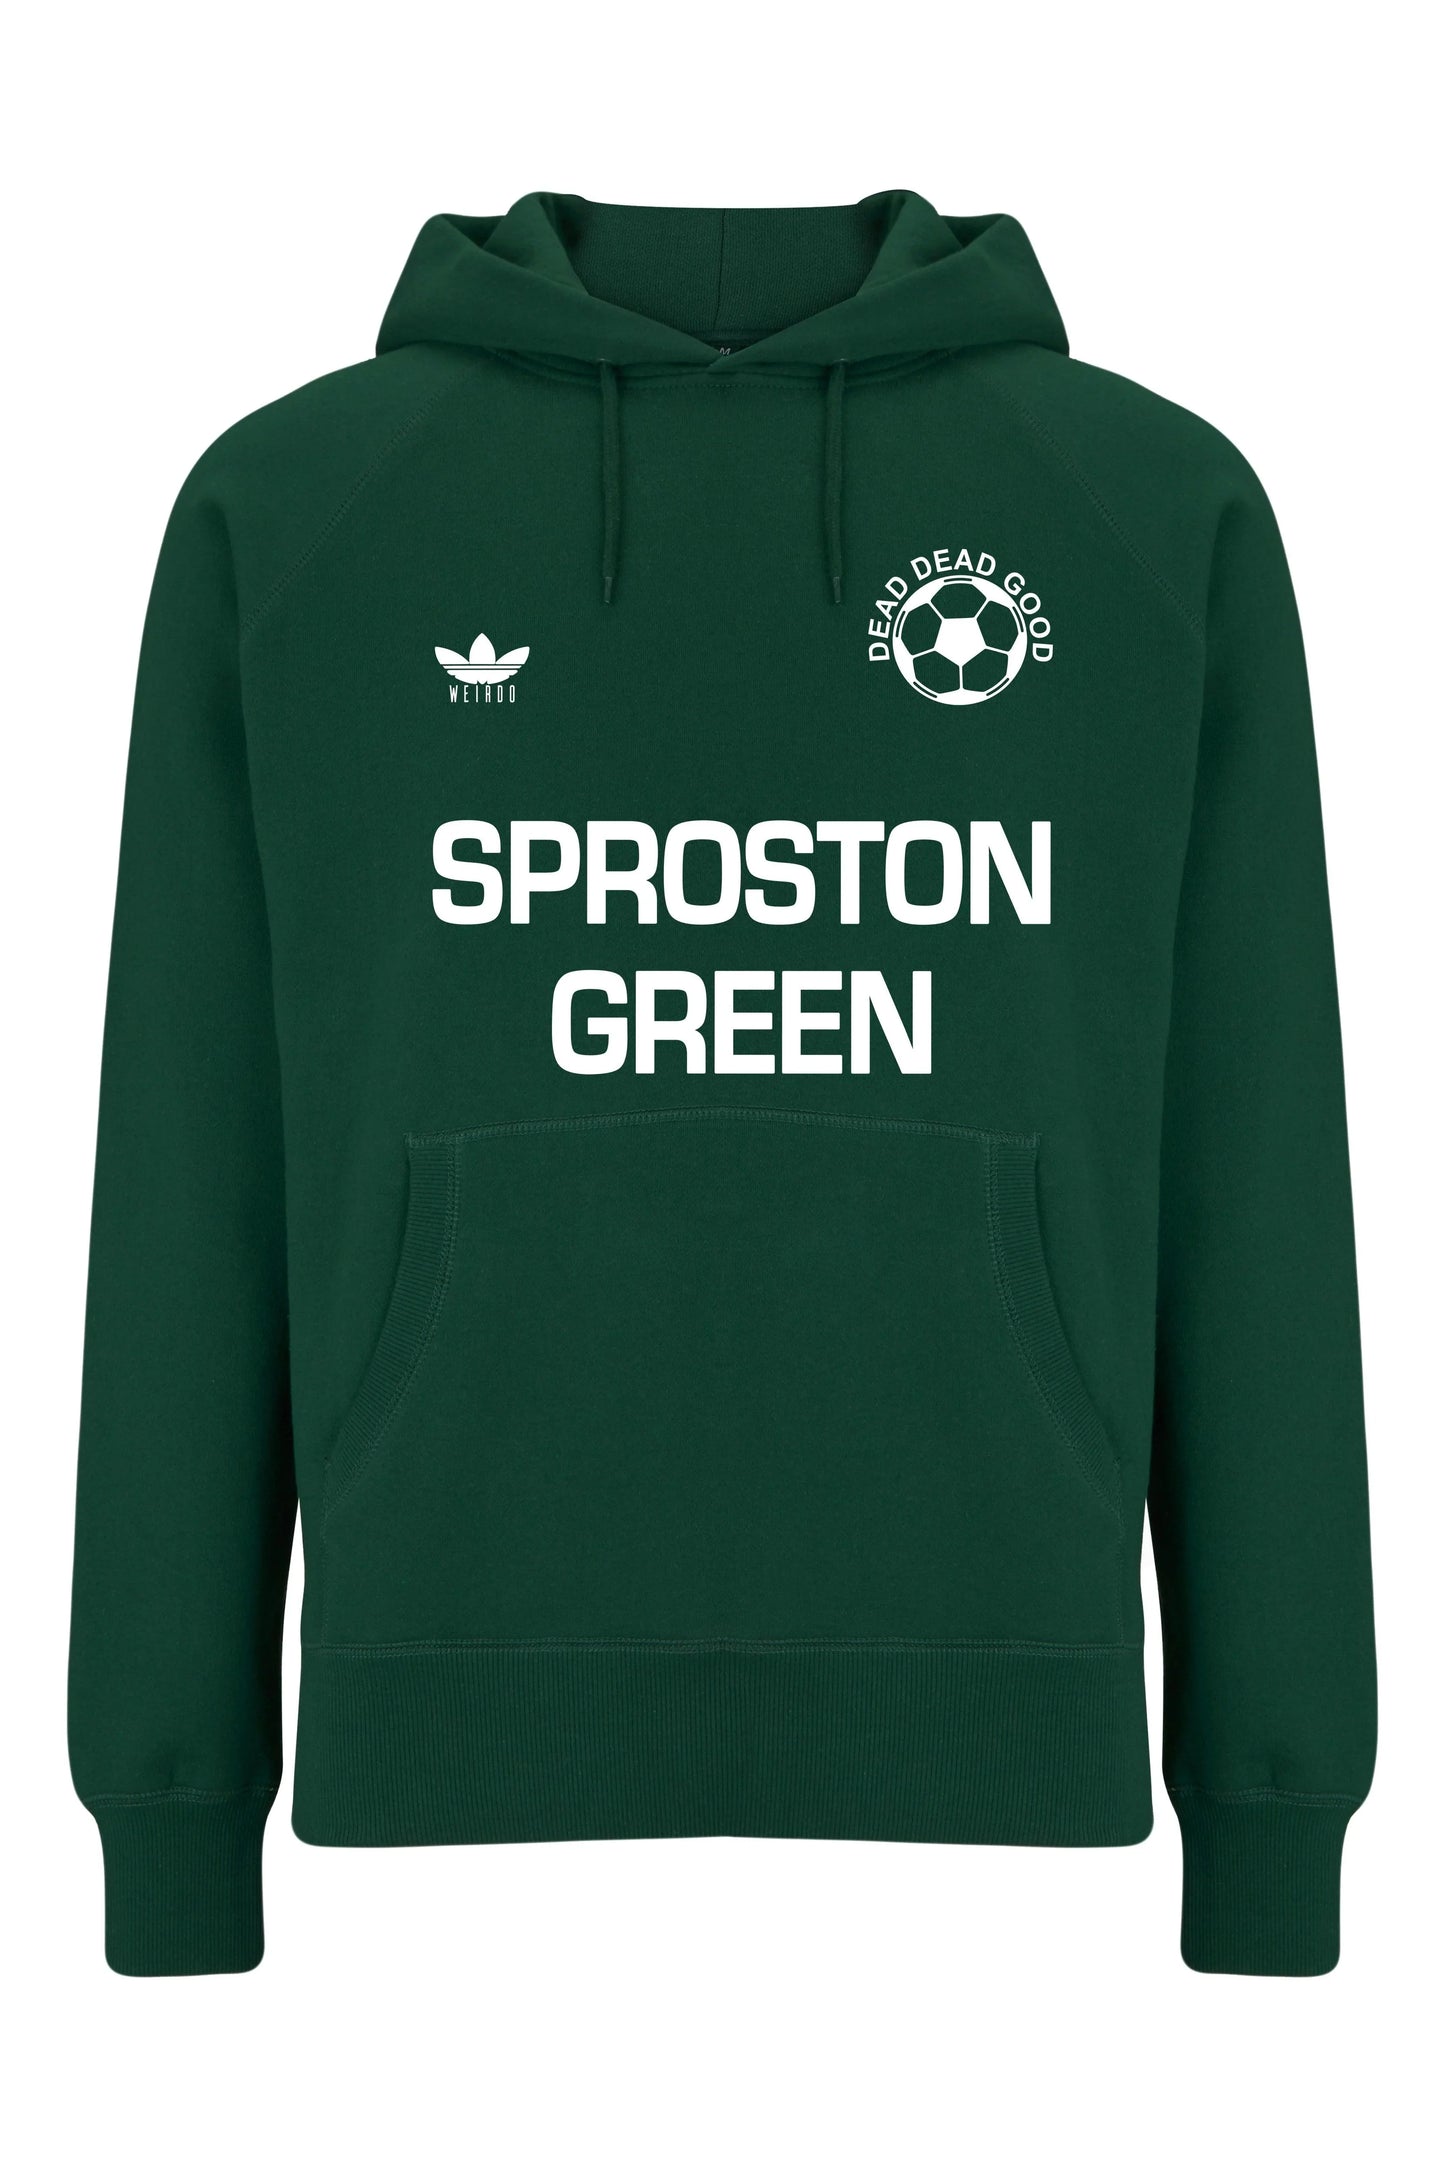 SPROSTON GREEN: Hoodie Inspired by The Charlatans & Football - SOUND IS COLOUR